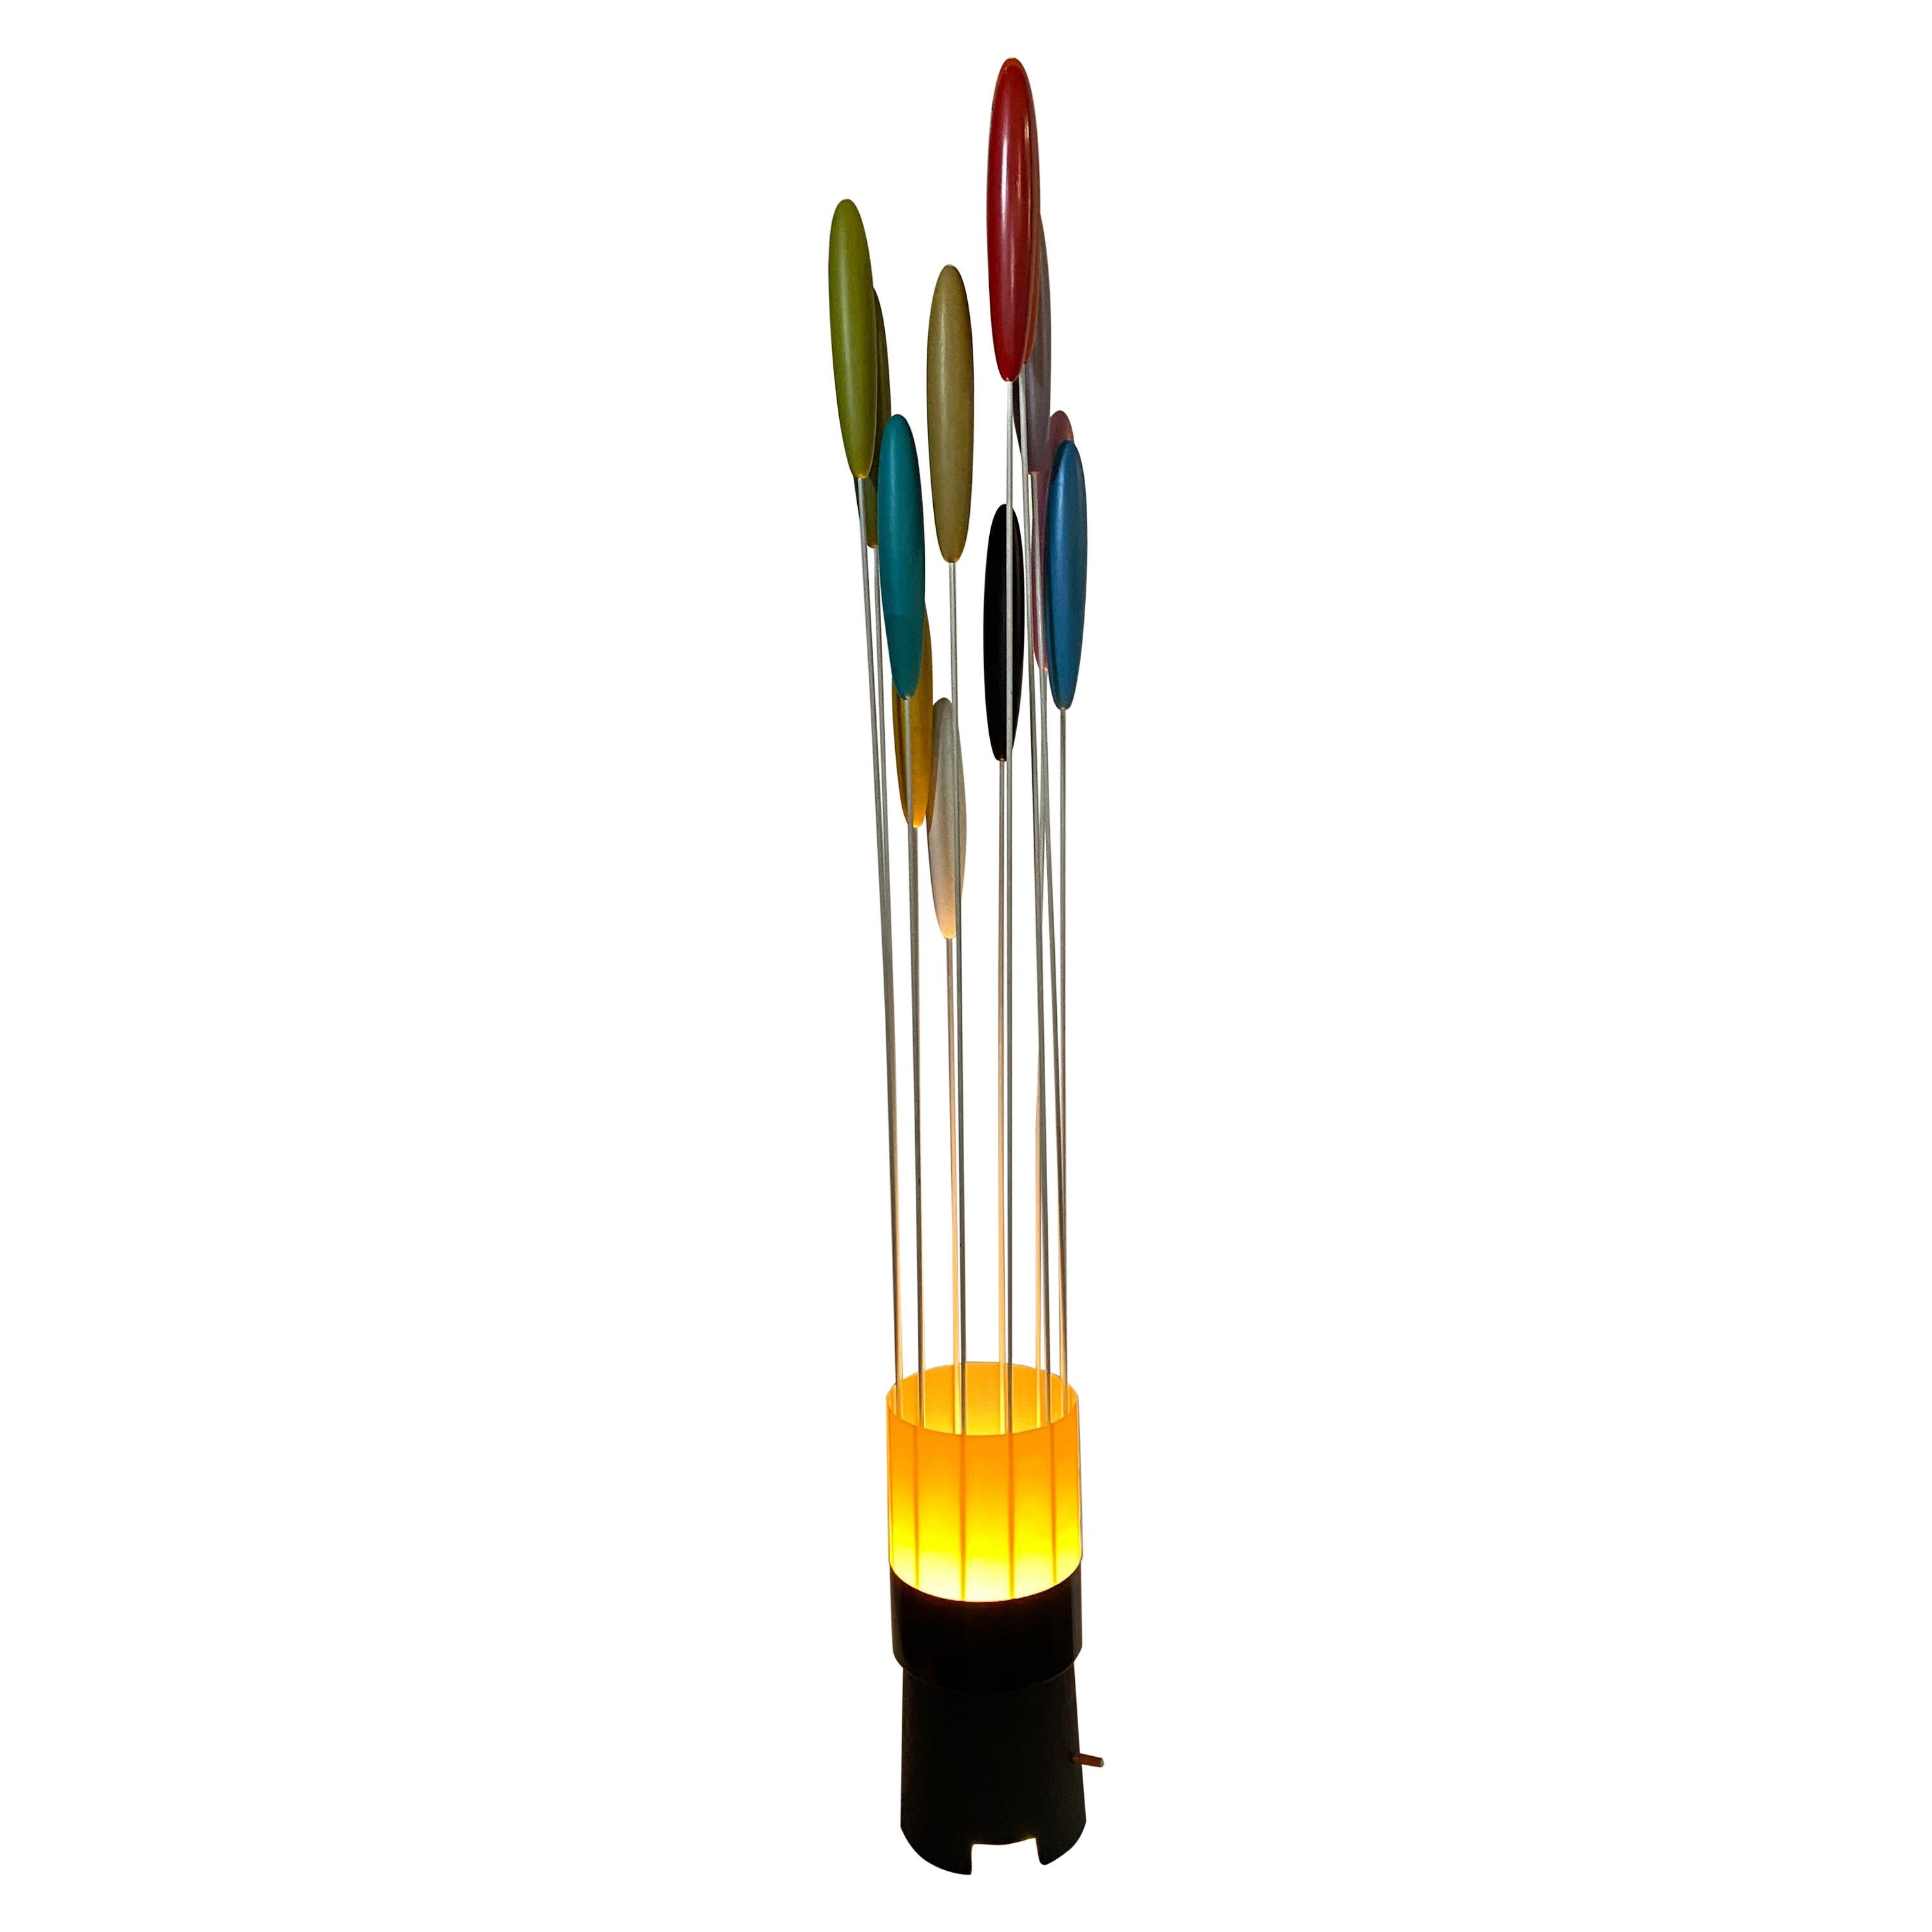 Bill Curry 'Cattails' Lamp.. Iconic Modernist Design, , amazing colors